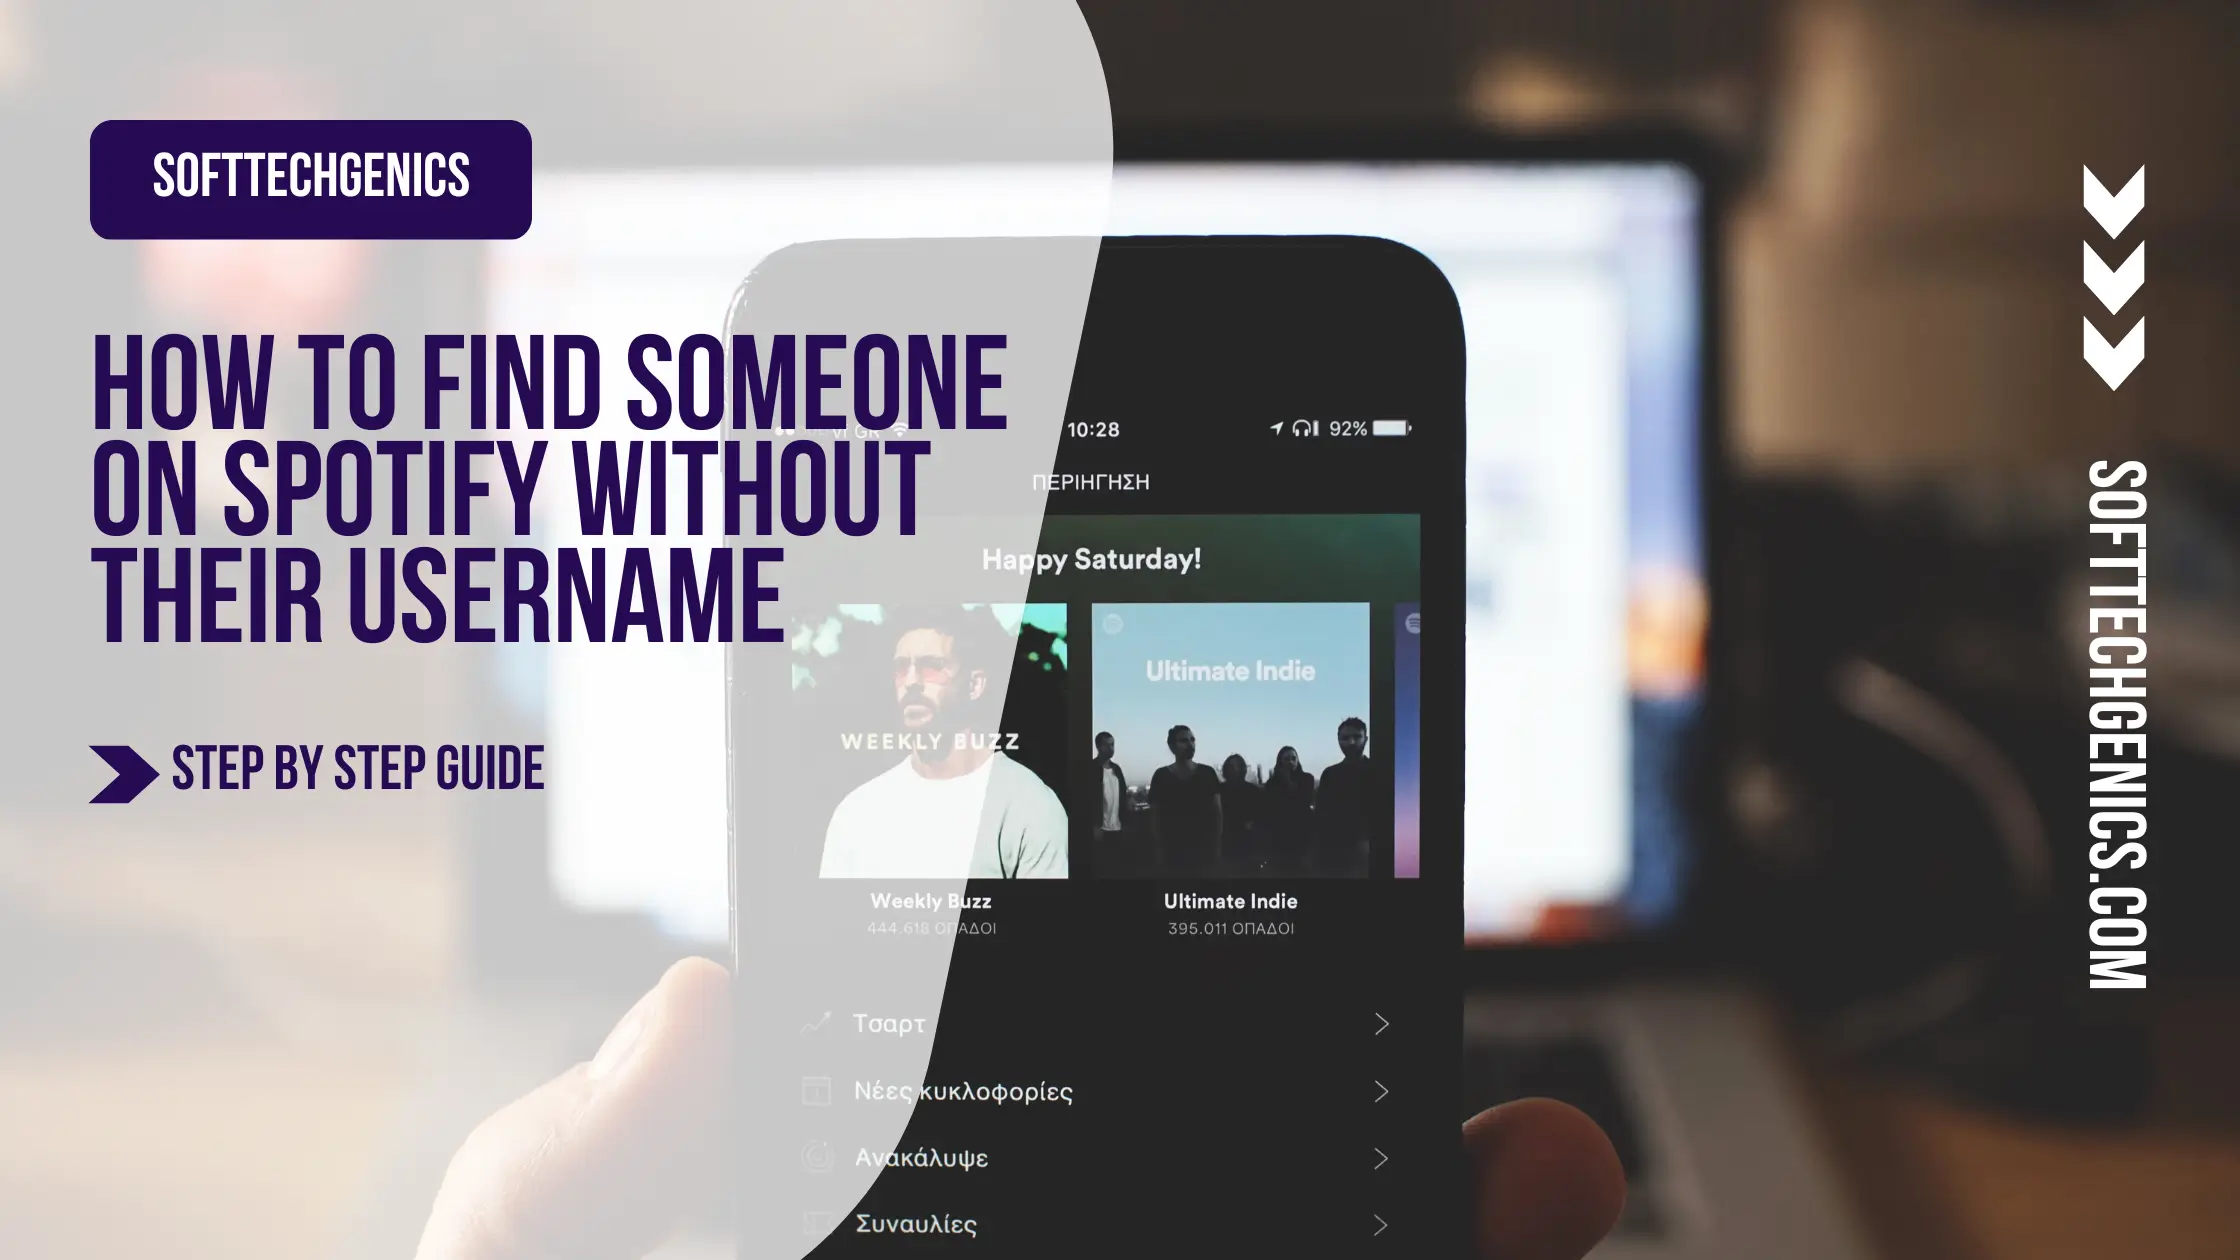 How To Find Someone On Spotify Without Their Username